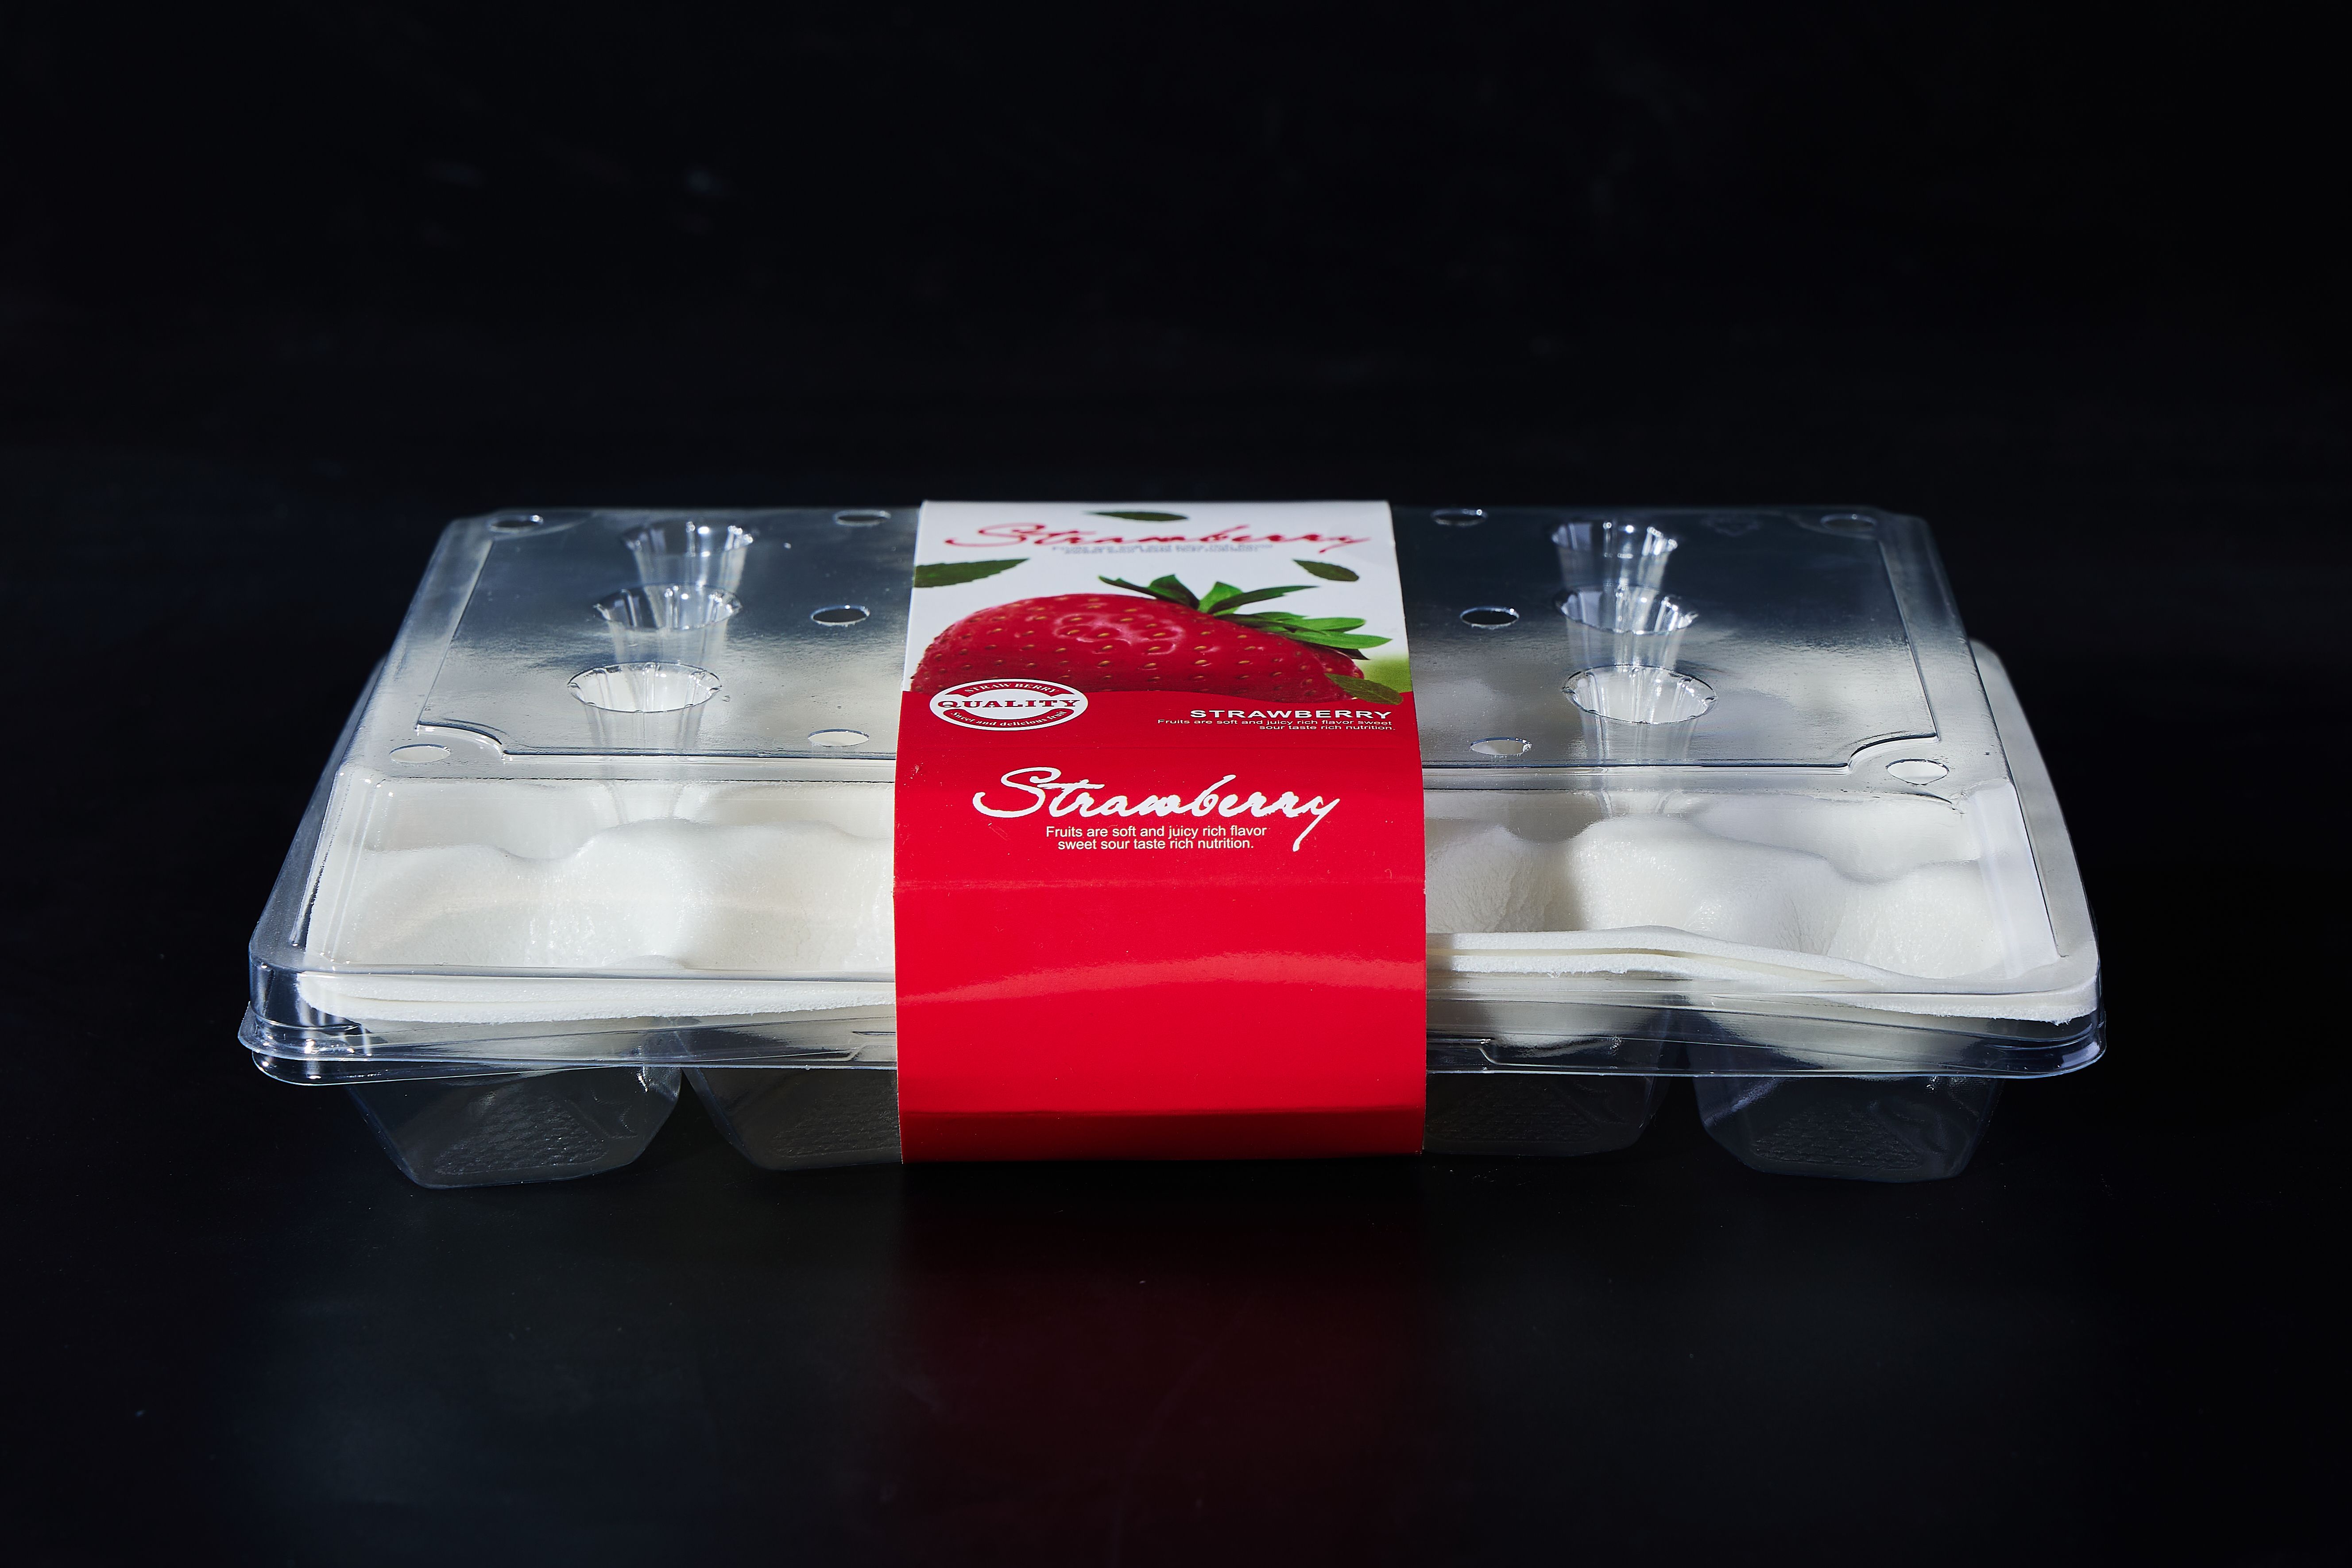 Clear Plastic Container for Strawberry 3X5 grids Strawberry box with sponge for Supermarket Farmer's Market